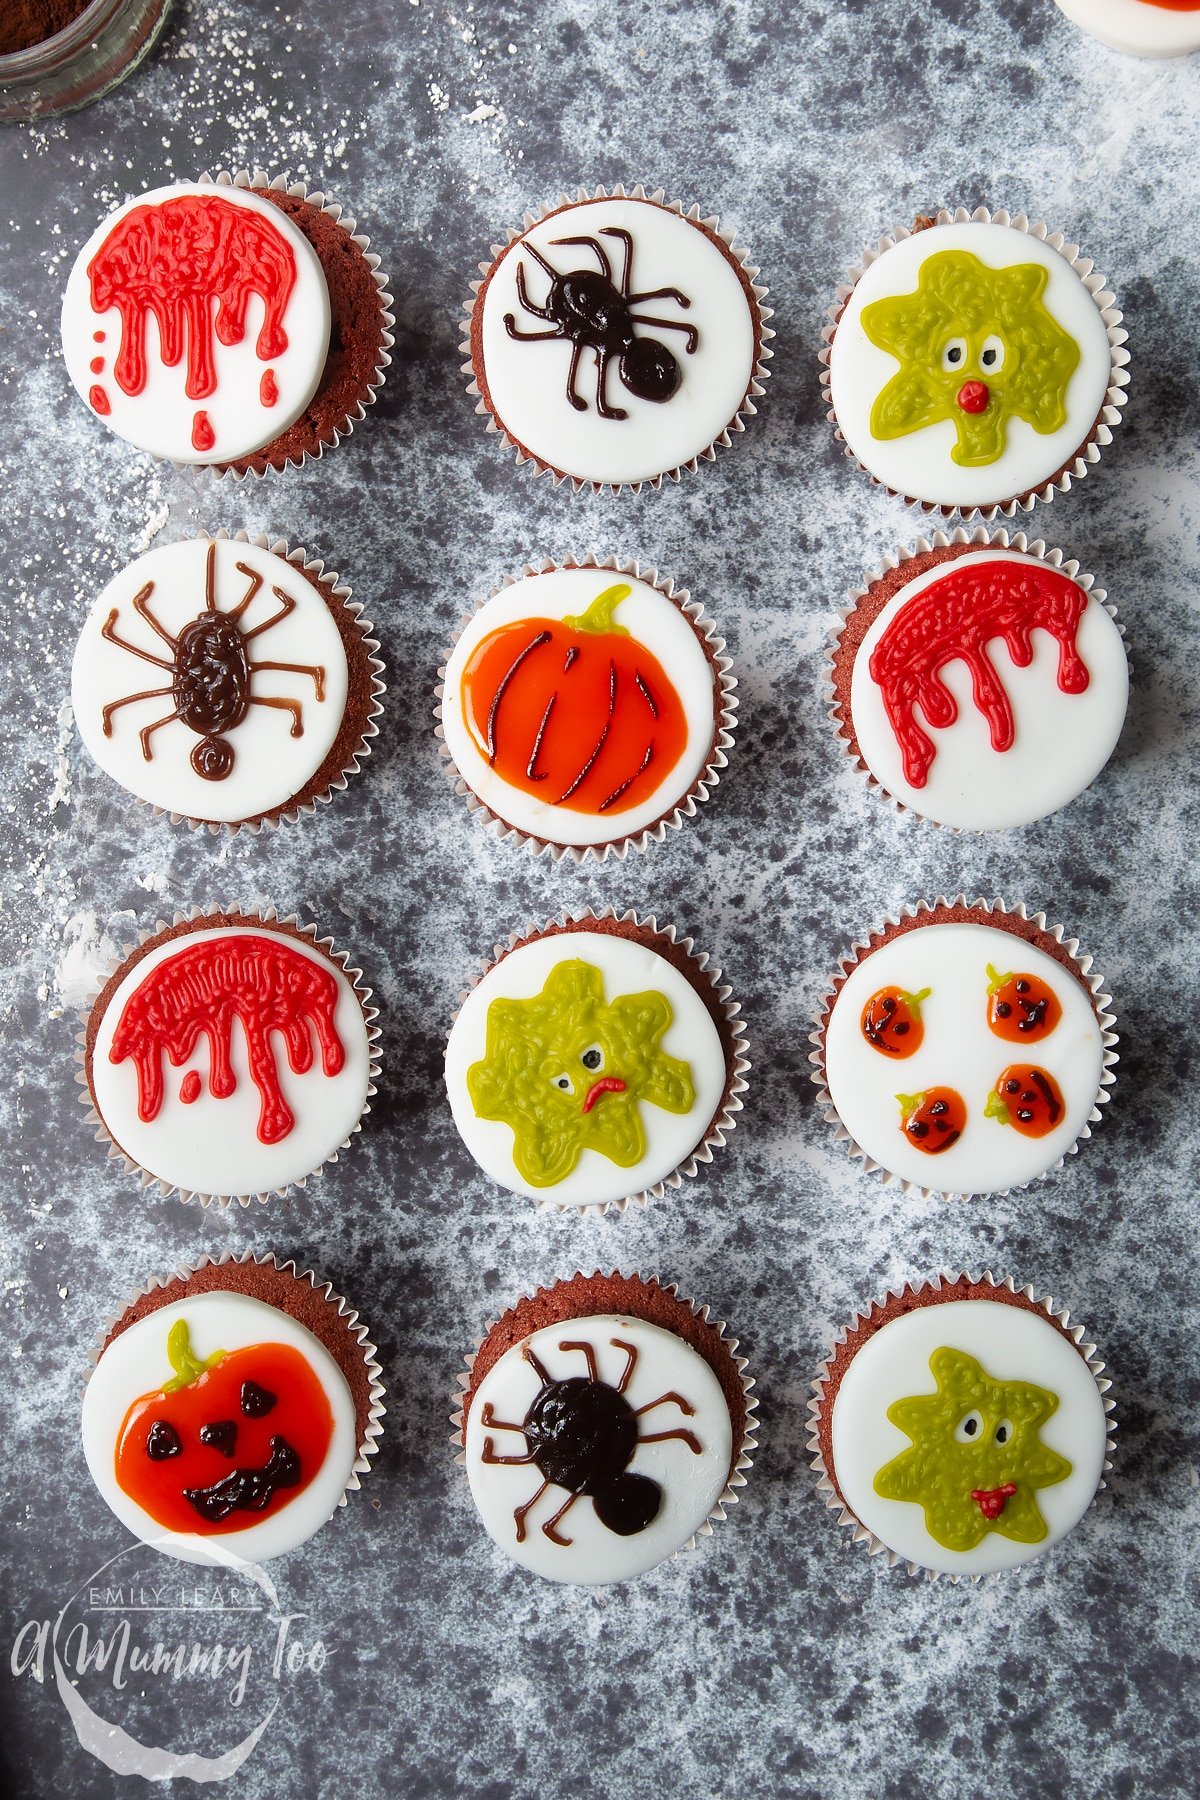 Dairy free Halloween cupcakes: red velvet cupcakes topped with chocolate frosting and white fondant discs decorated with icing pens. The cupcake are decorated with various designs, such as pumpkins, spiders. dripping blood and green monsters.